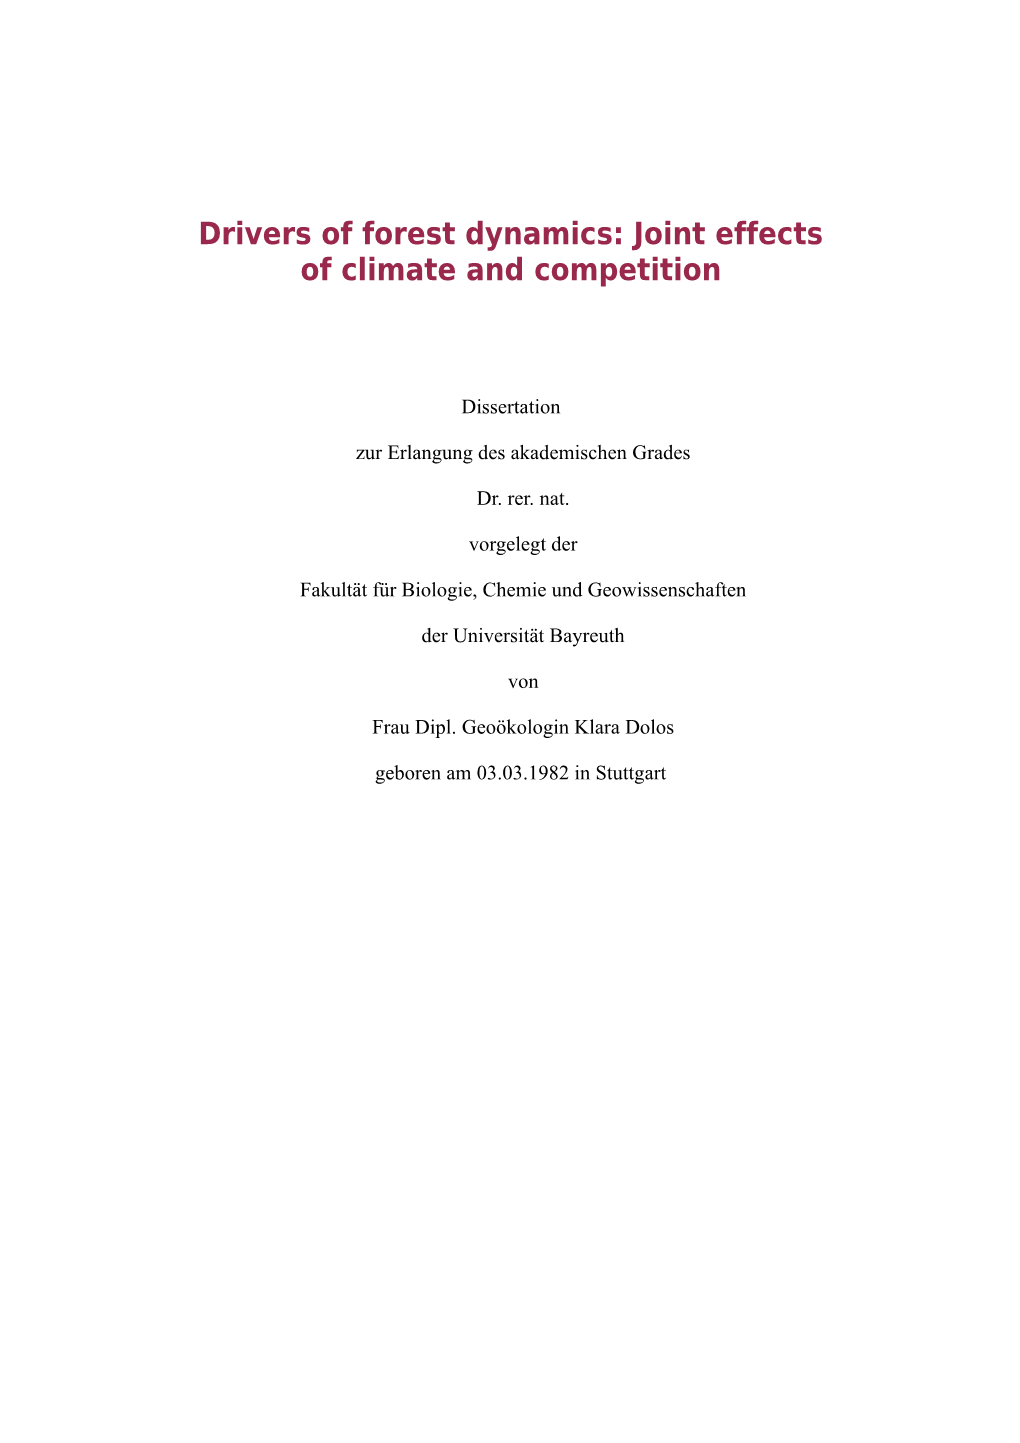 Drivers of Forest Dynamics: Joint Effects of Climate and Competition